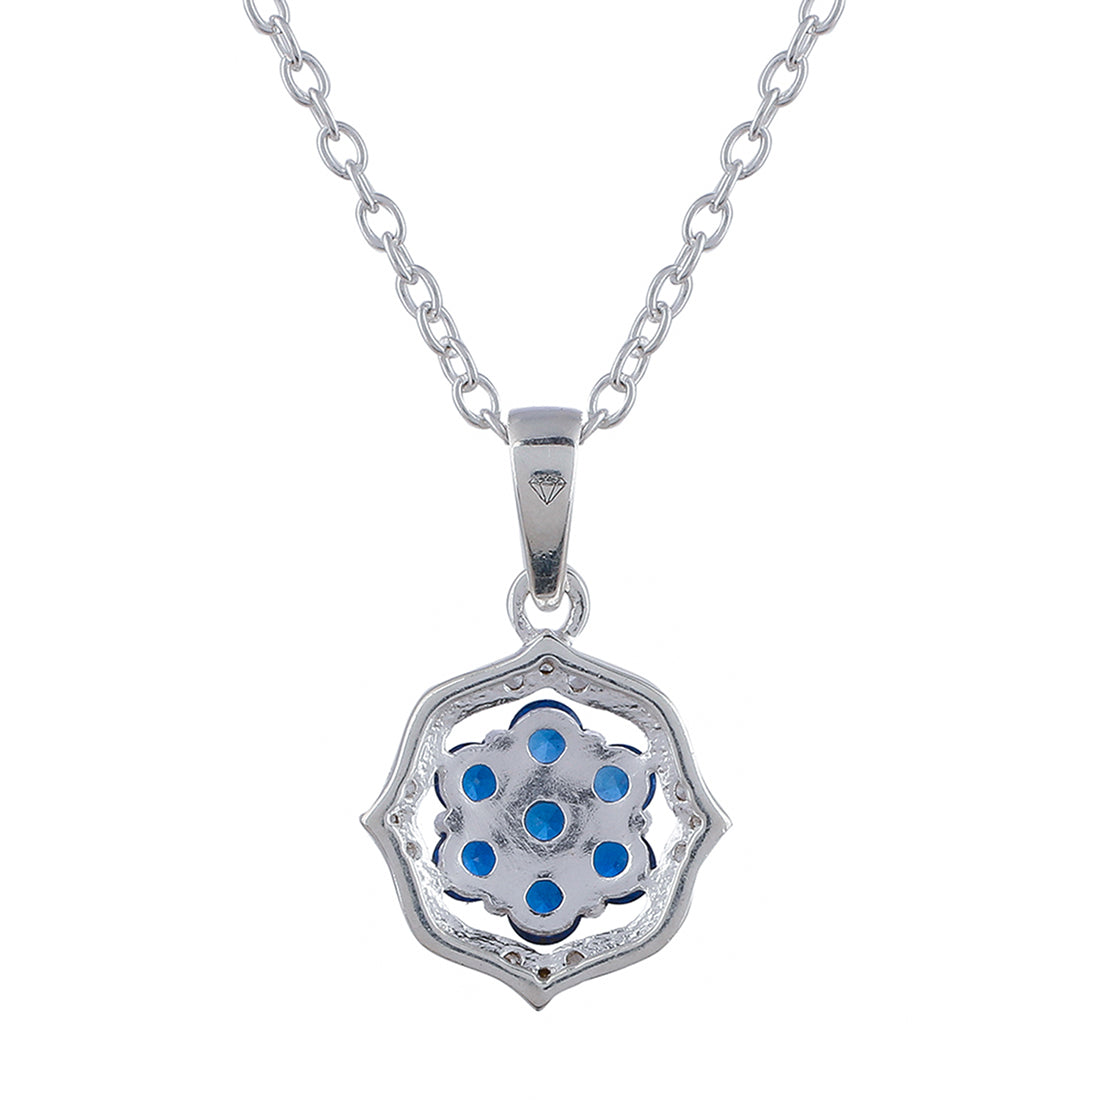 Blue Stone Decked 925 Sterling Silver Pendant